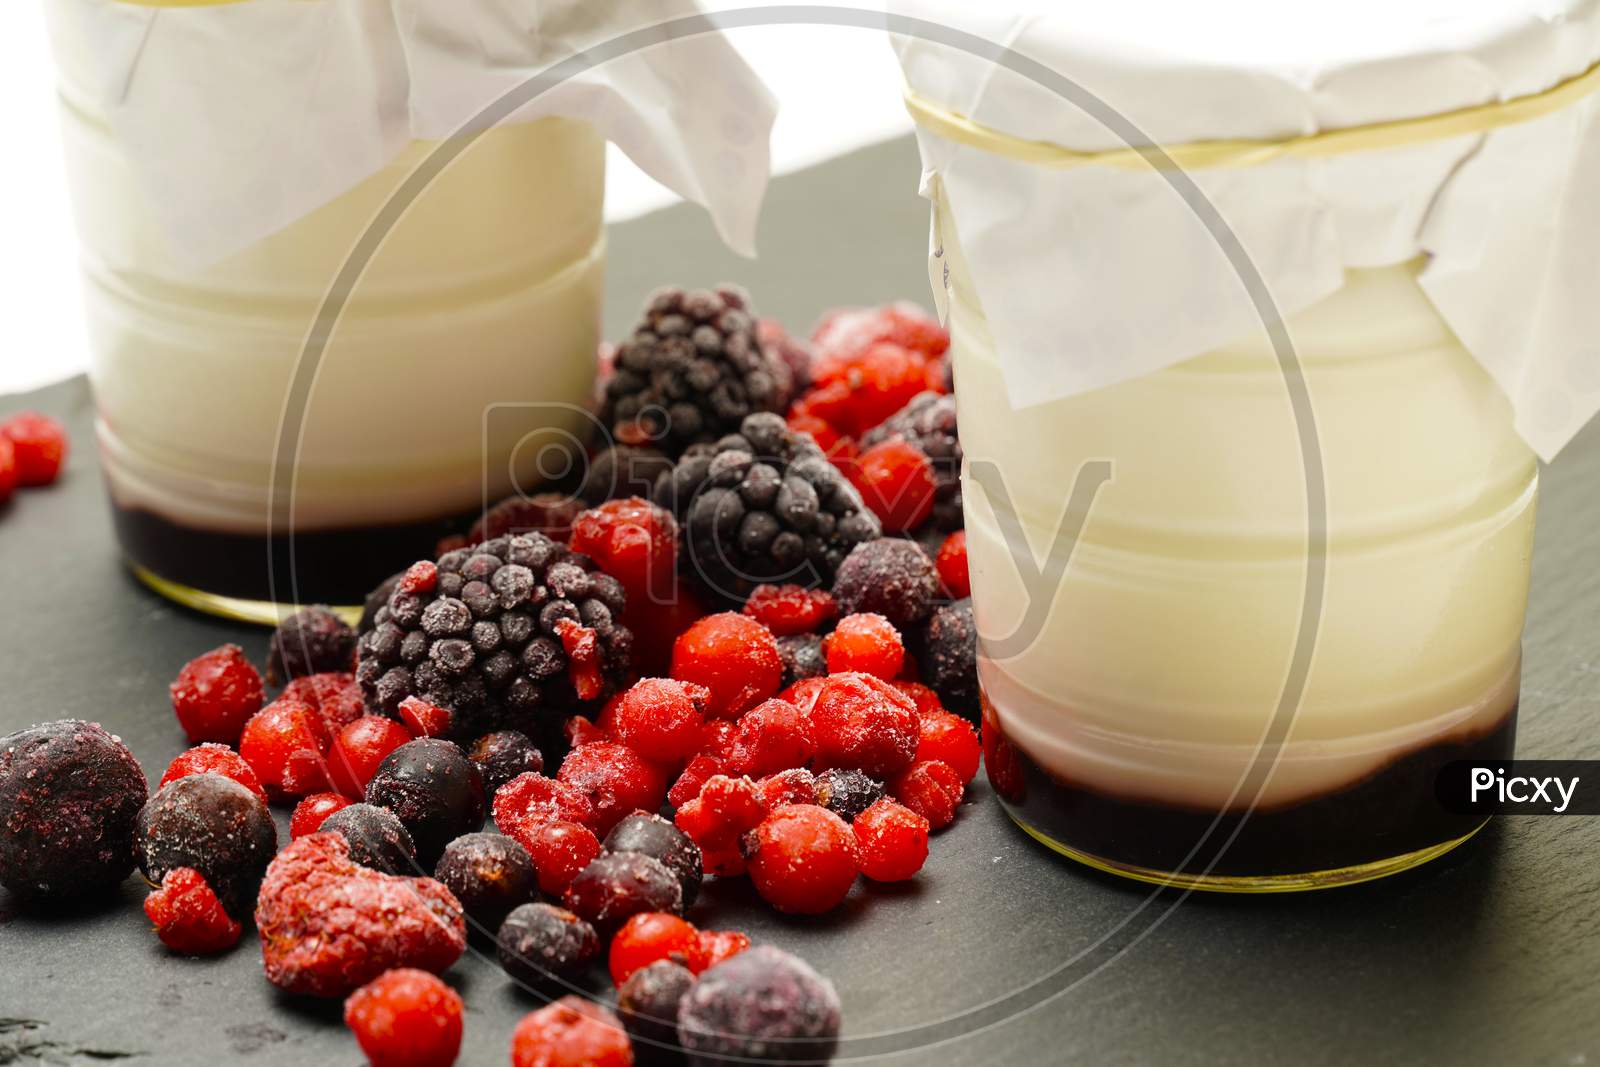 Organic Yogurts Of Blackberries And Red Fruits. Gastronomic Photography